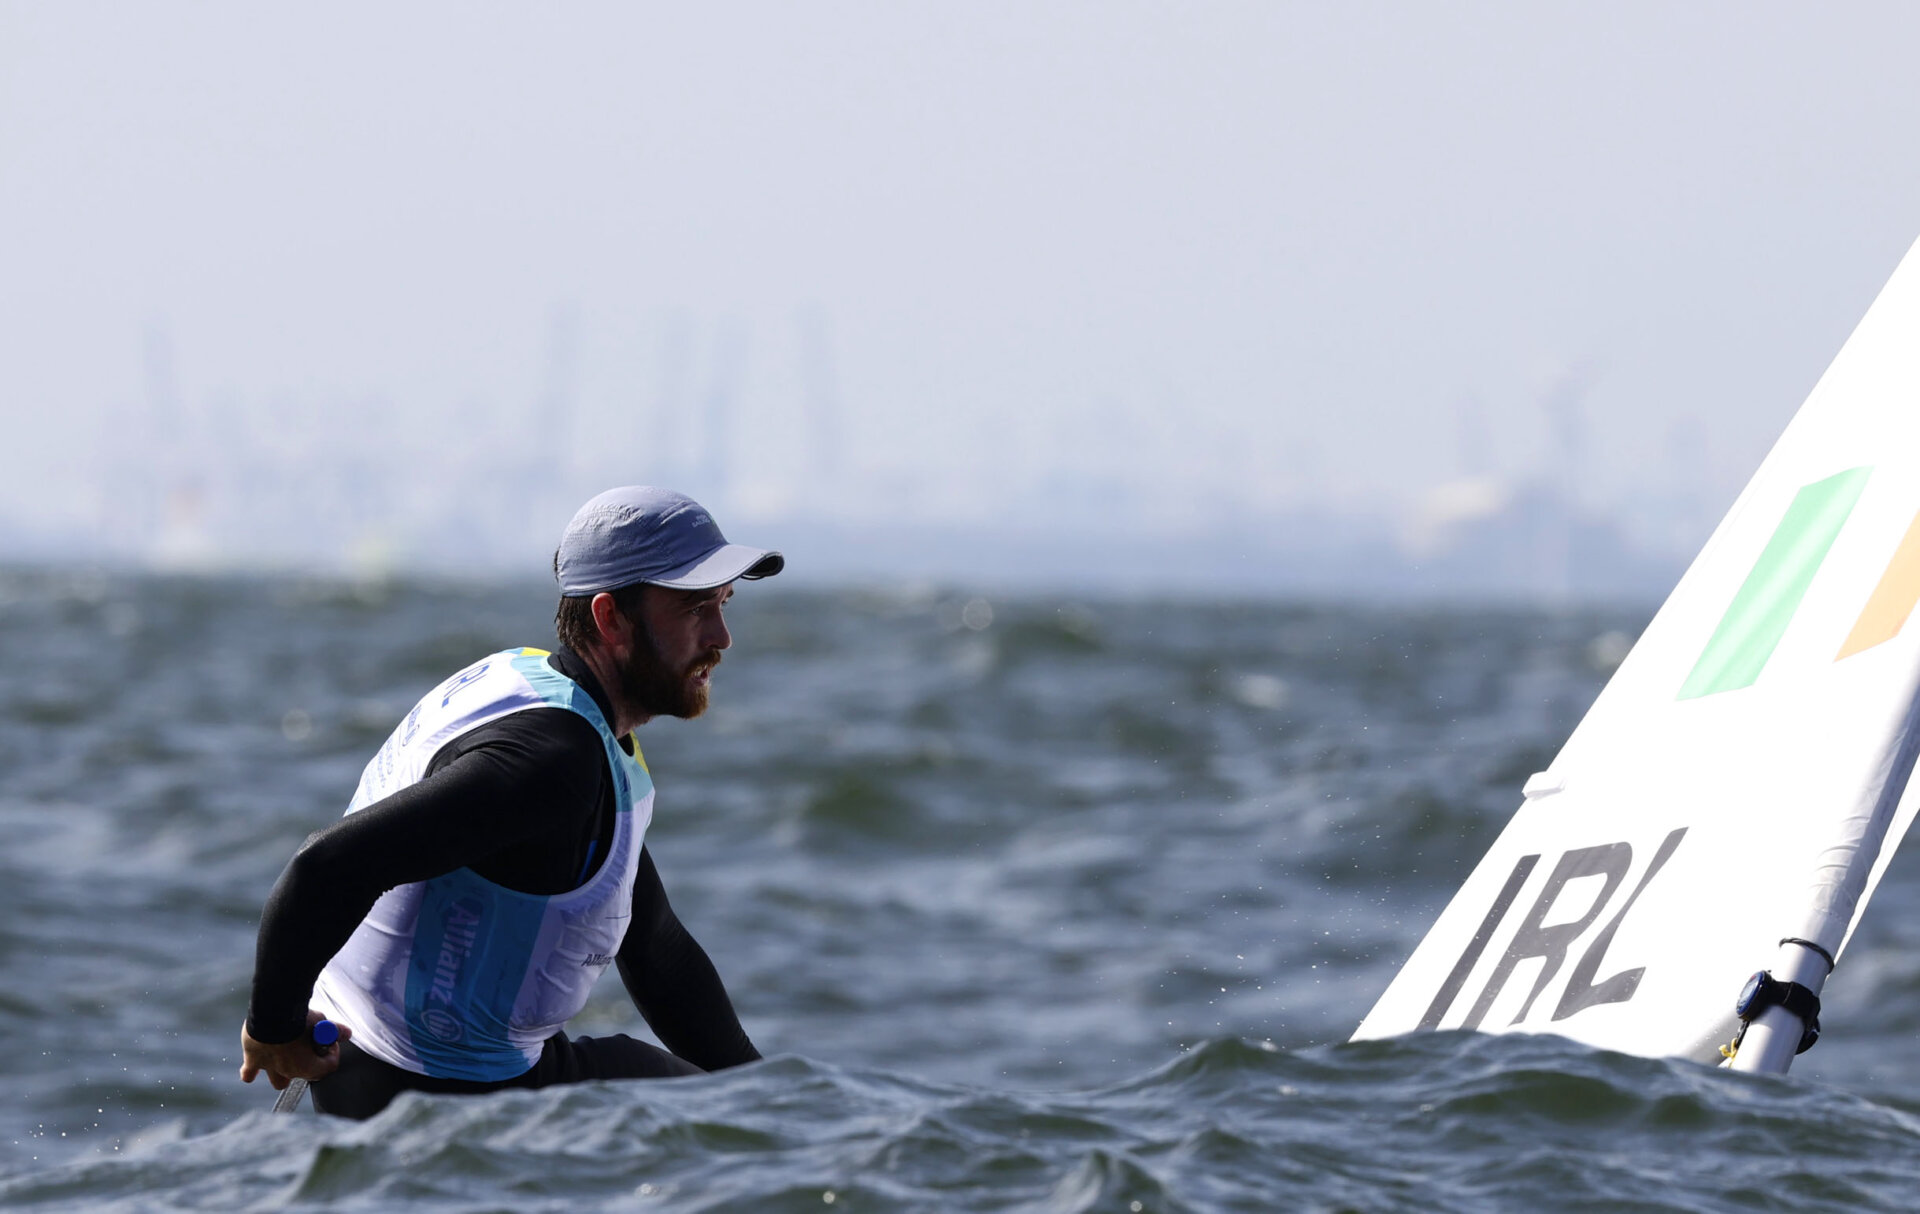 Finn Lynch World Sailing Championships, on the cusp of Olympic Qualification, Credit INPHO